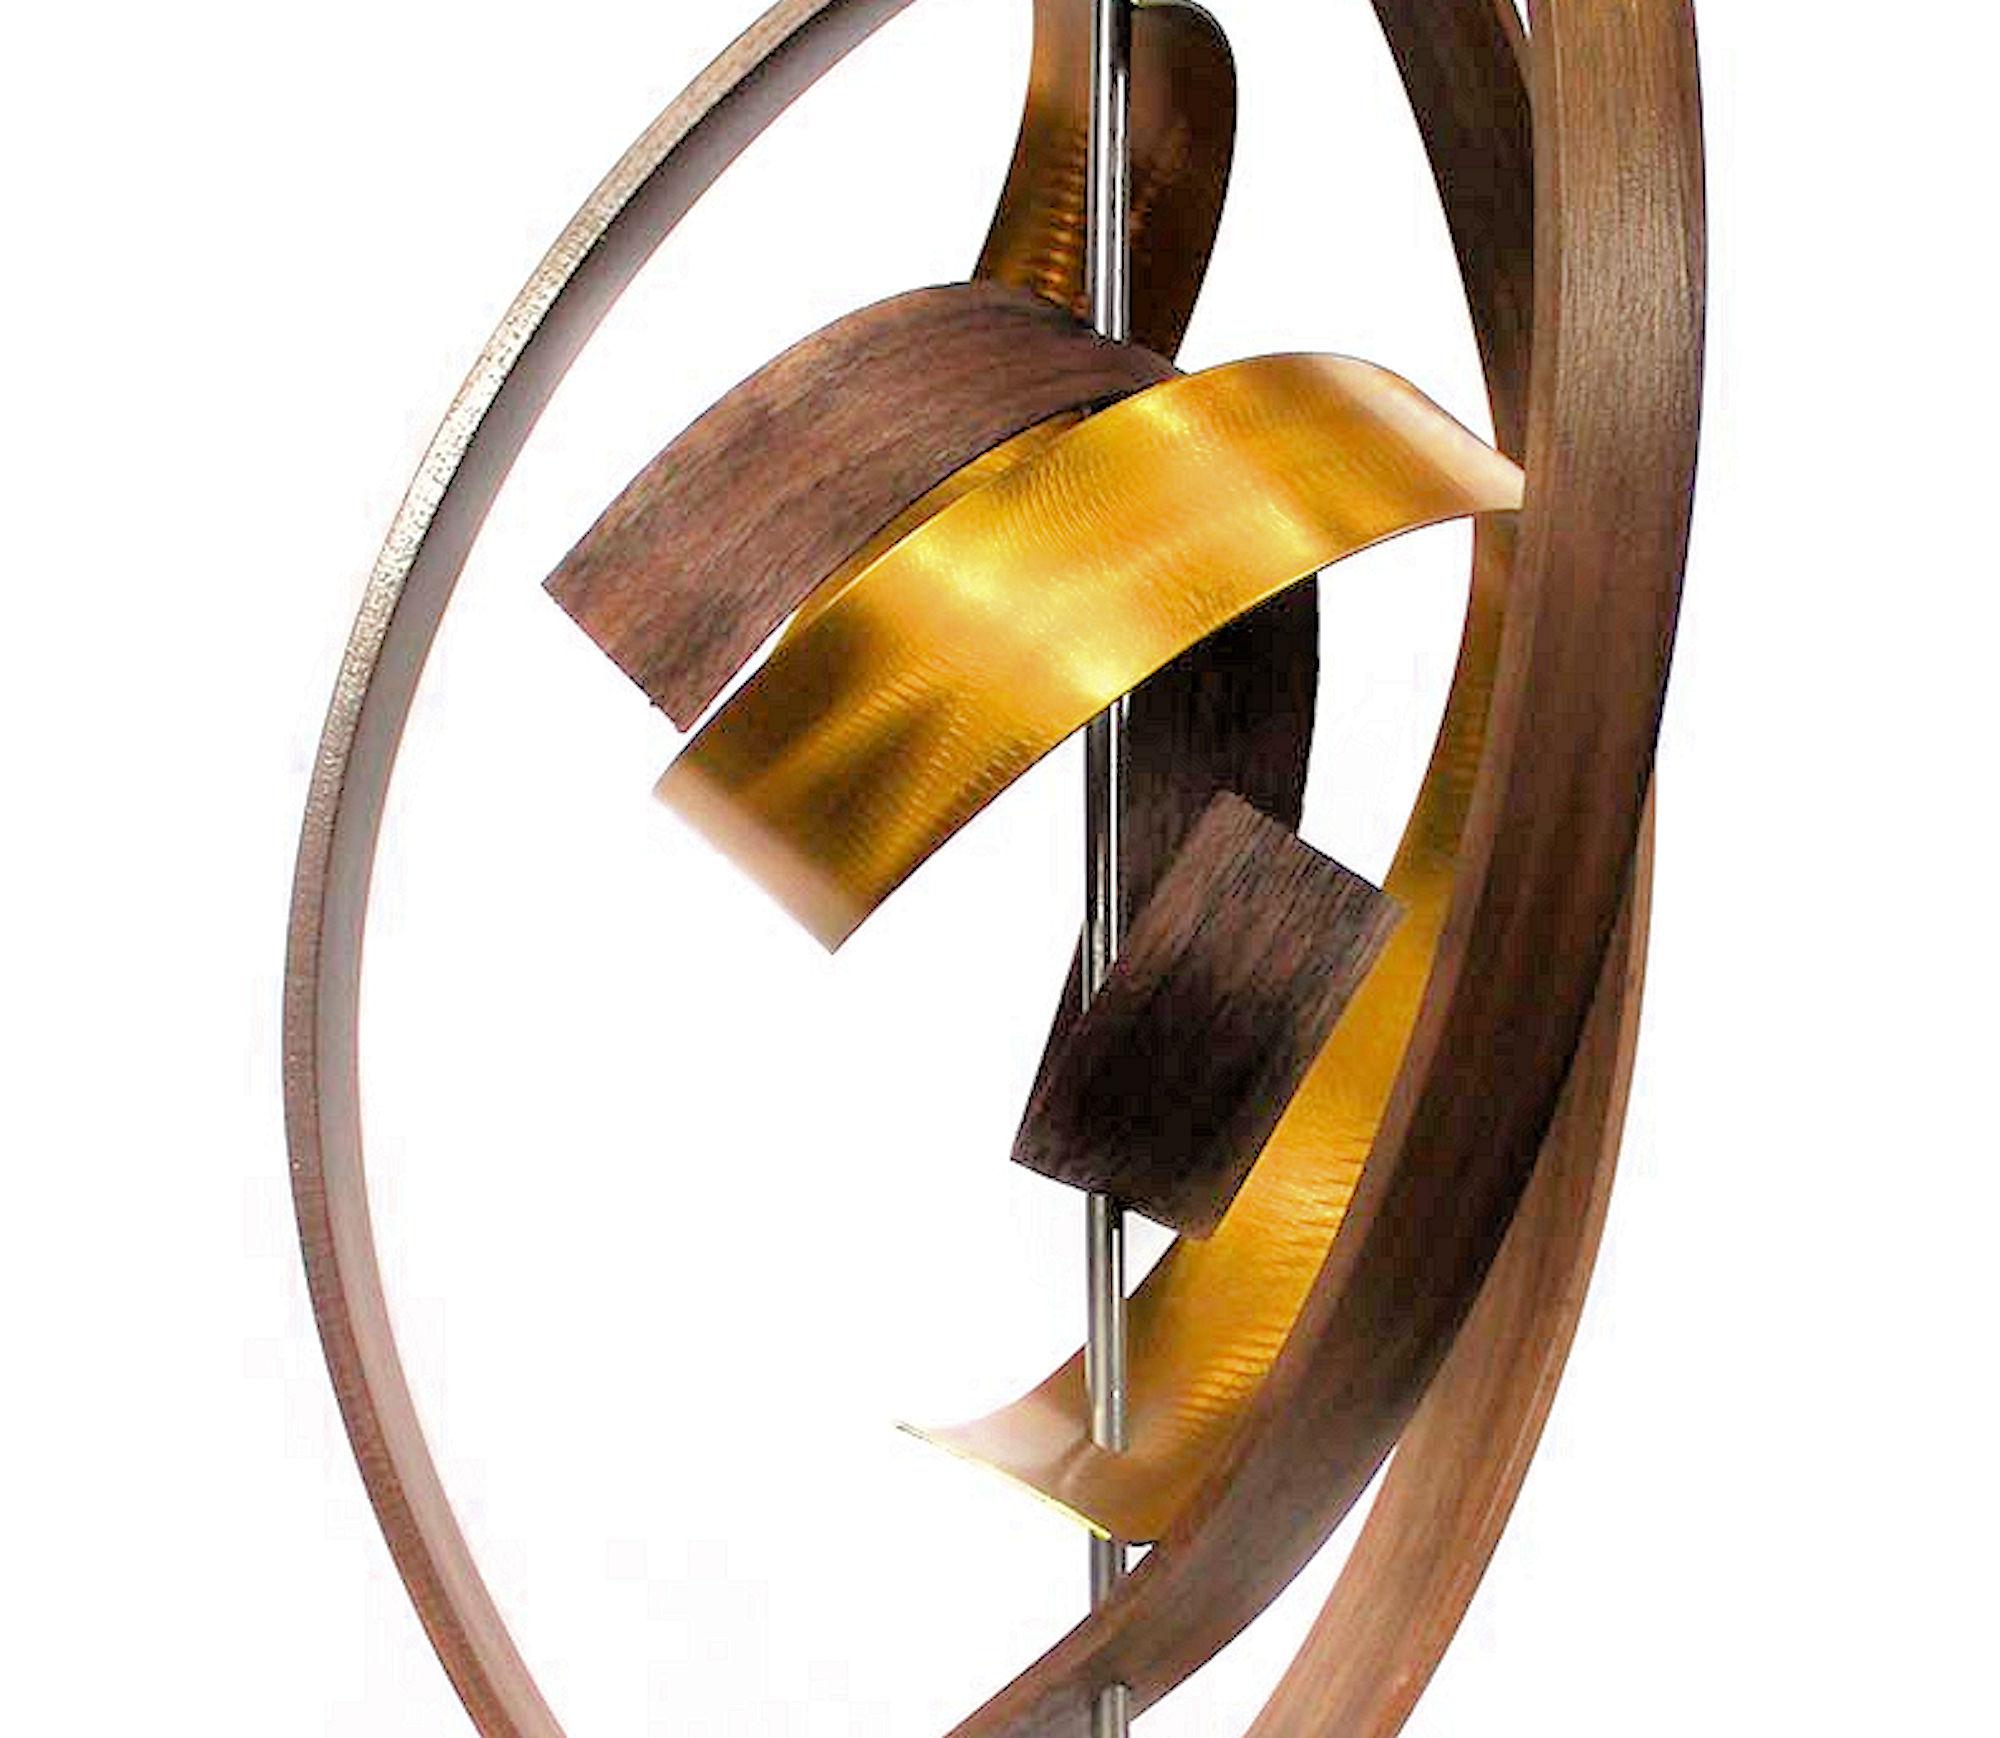 Wood Metal Sculpture, Mid-Century Modern Inspired, Contemporary Art by Jeff L. 1